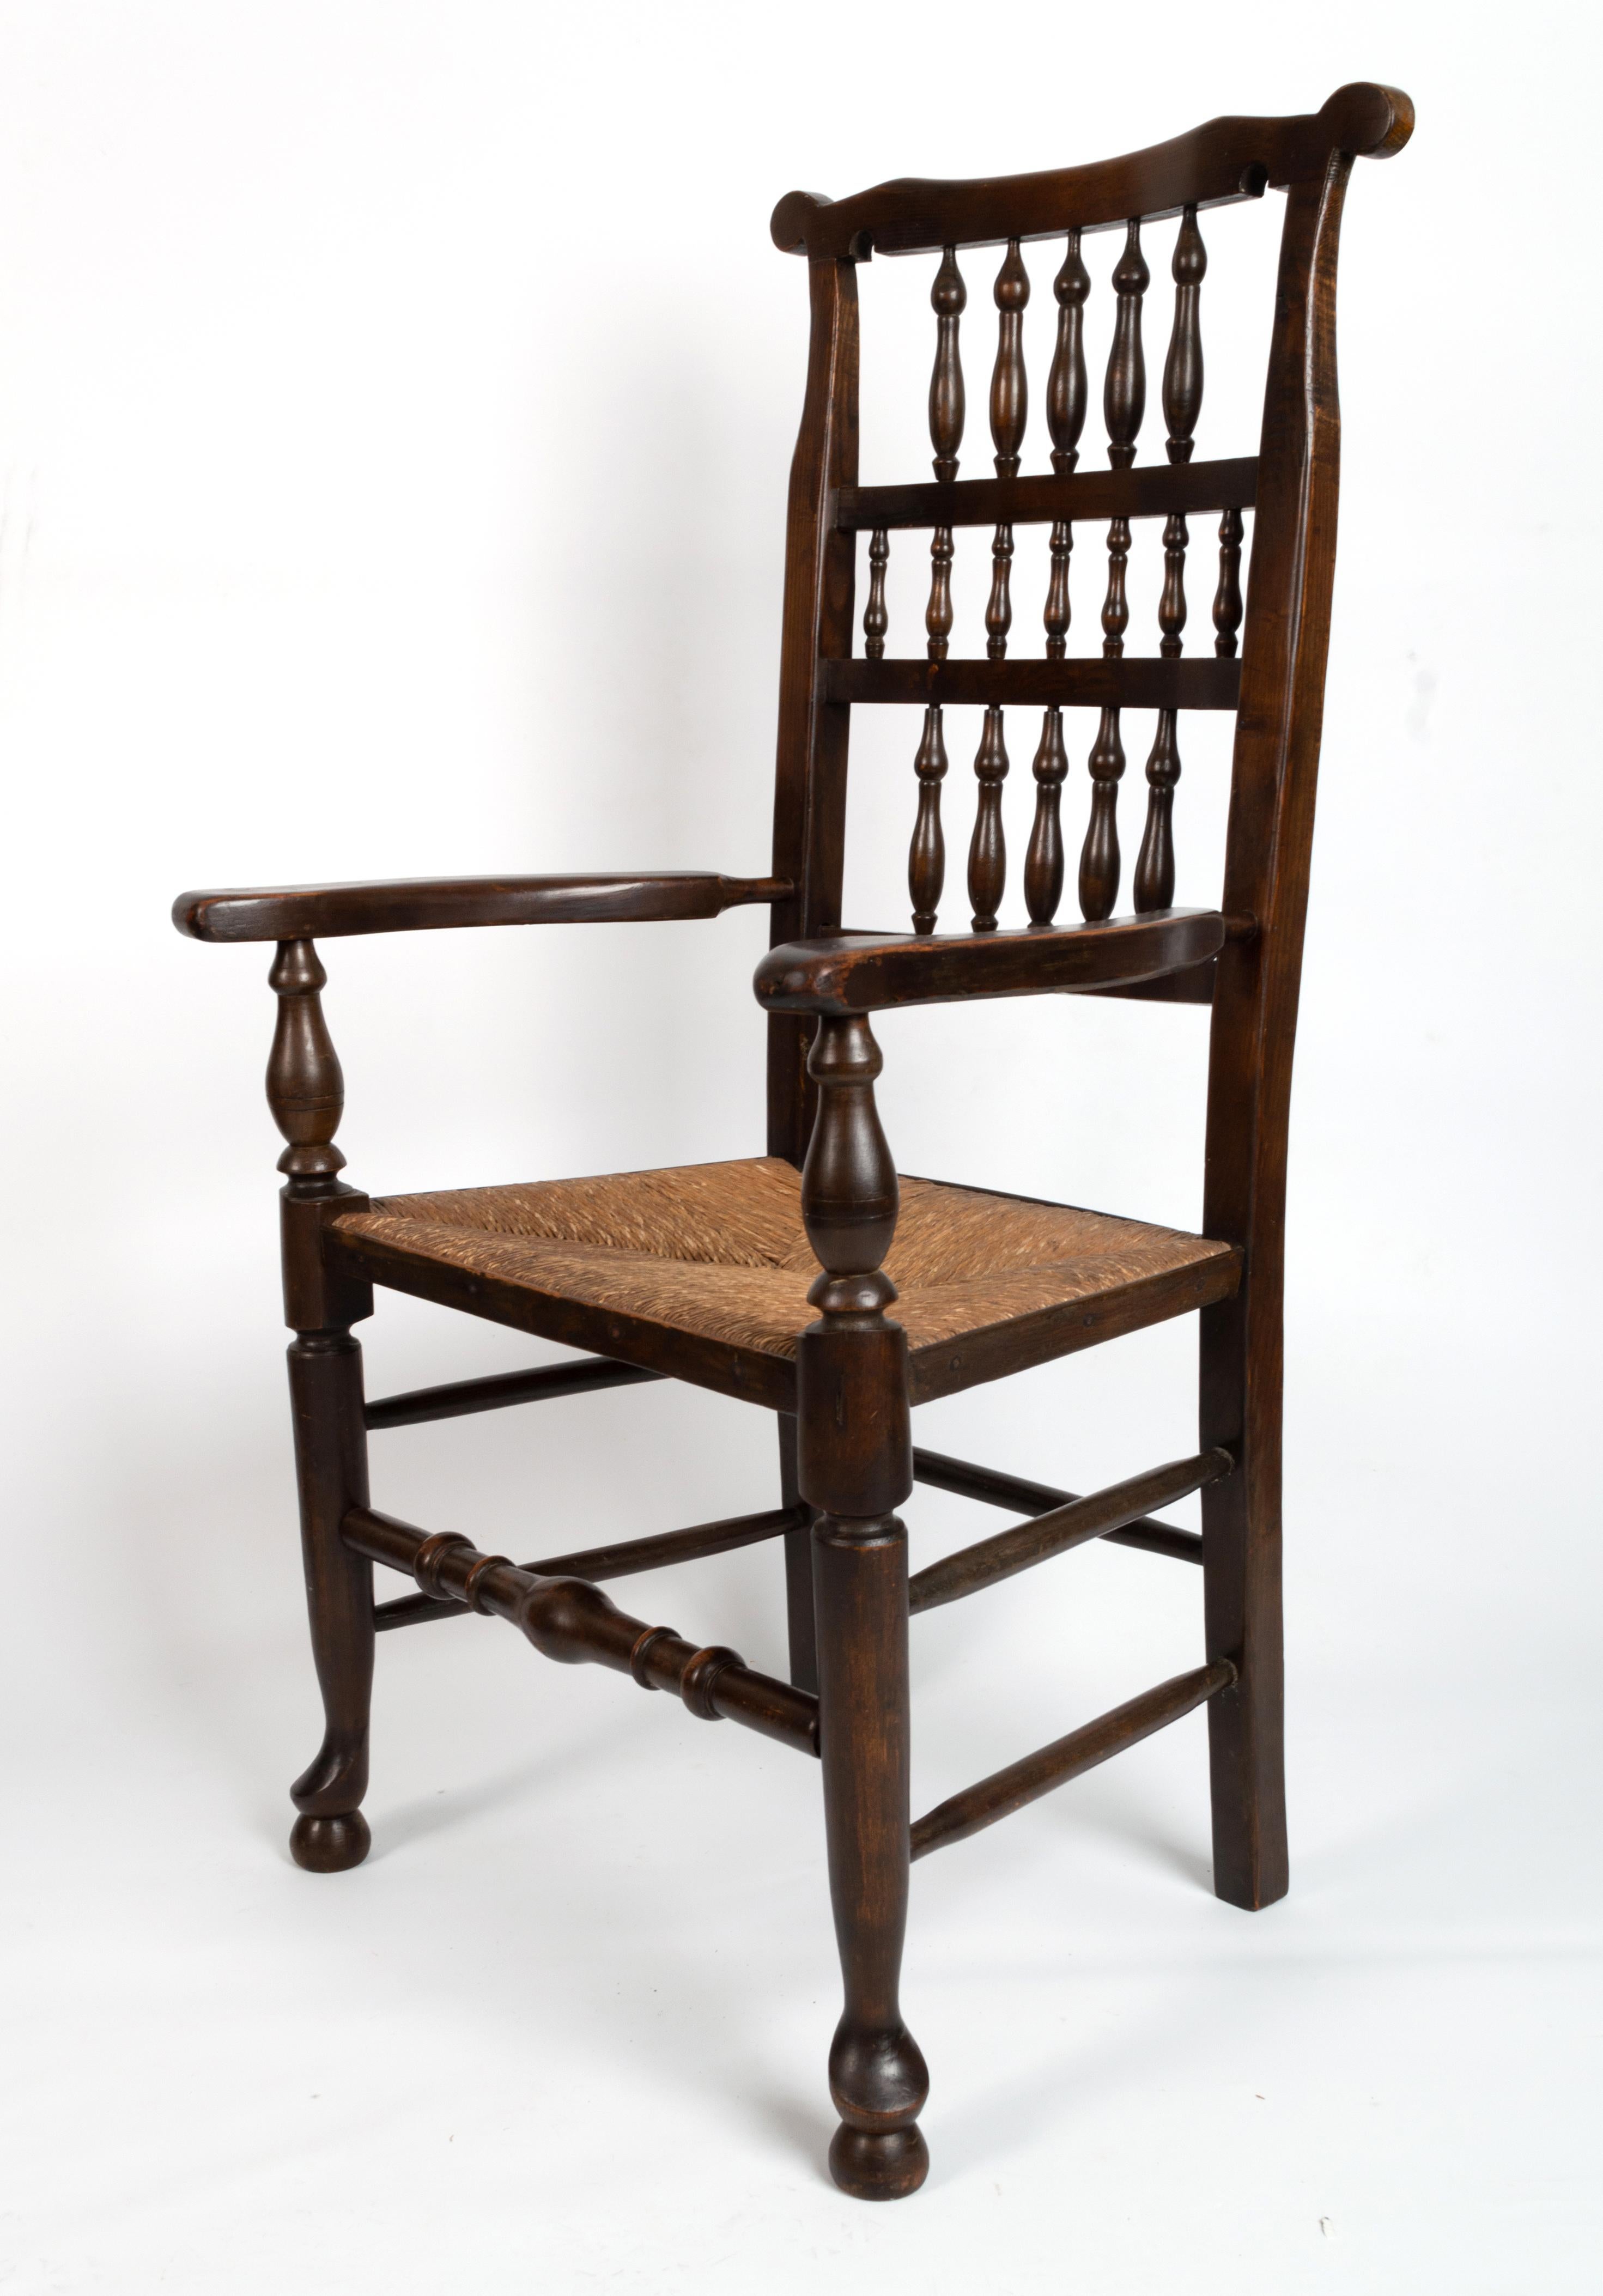 Antique English Arts & Crafts Oak Rush Elbow Chair C.1840 For Sale 1